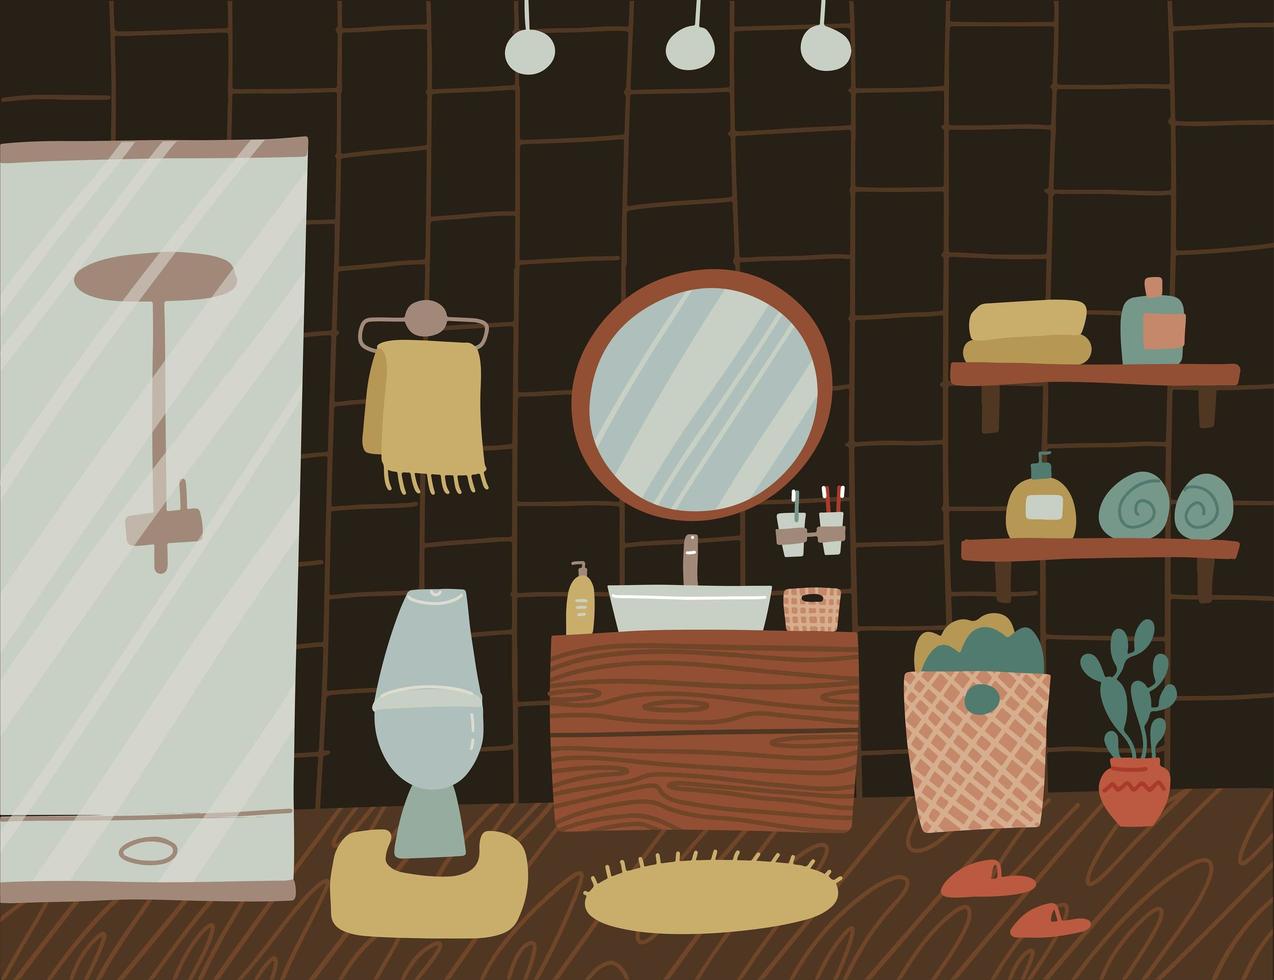 Stylish dark wooden Scandinavian bathroom interior - tap, shower, toilet, sink, home decorations. Cozy modern comfy apartment furnished in Hygge style. Vector flat illustration